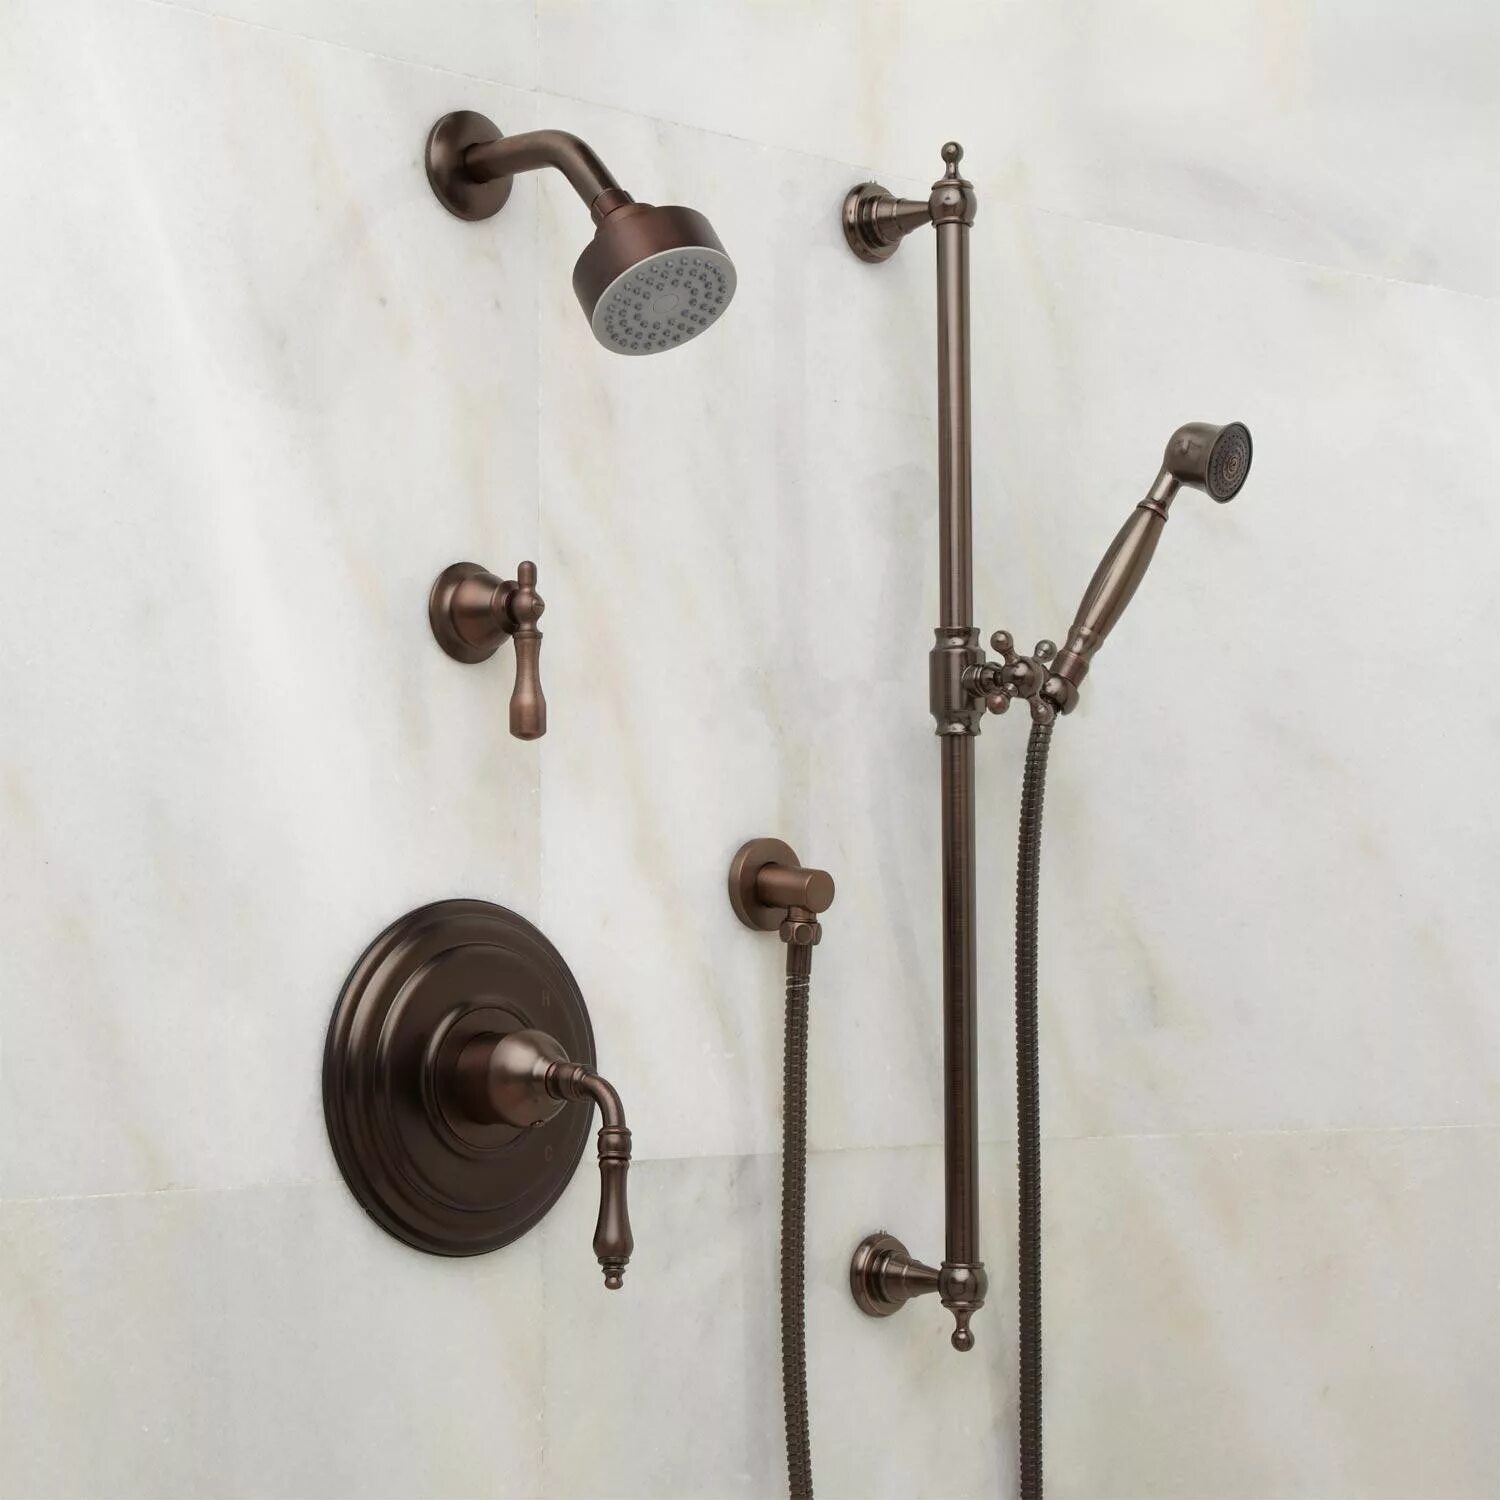 Shower head Oil RUBBED Bronze. Shower system